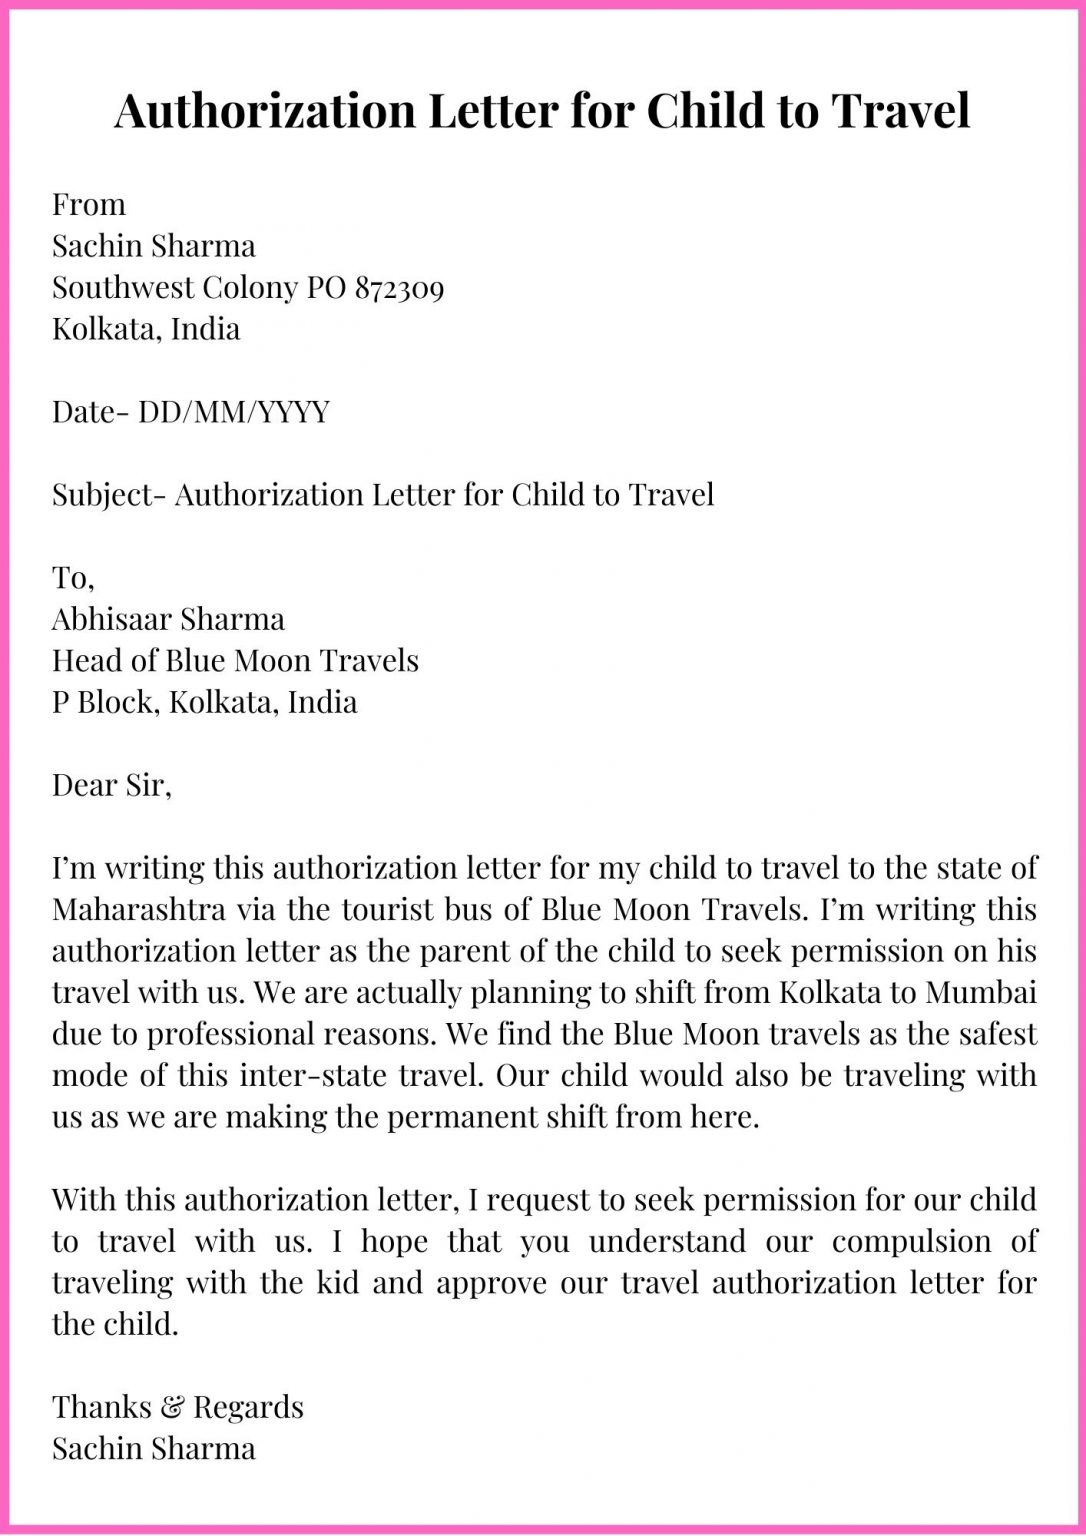 travel letters for minors